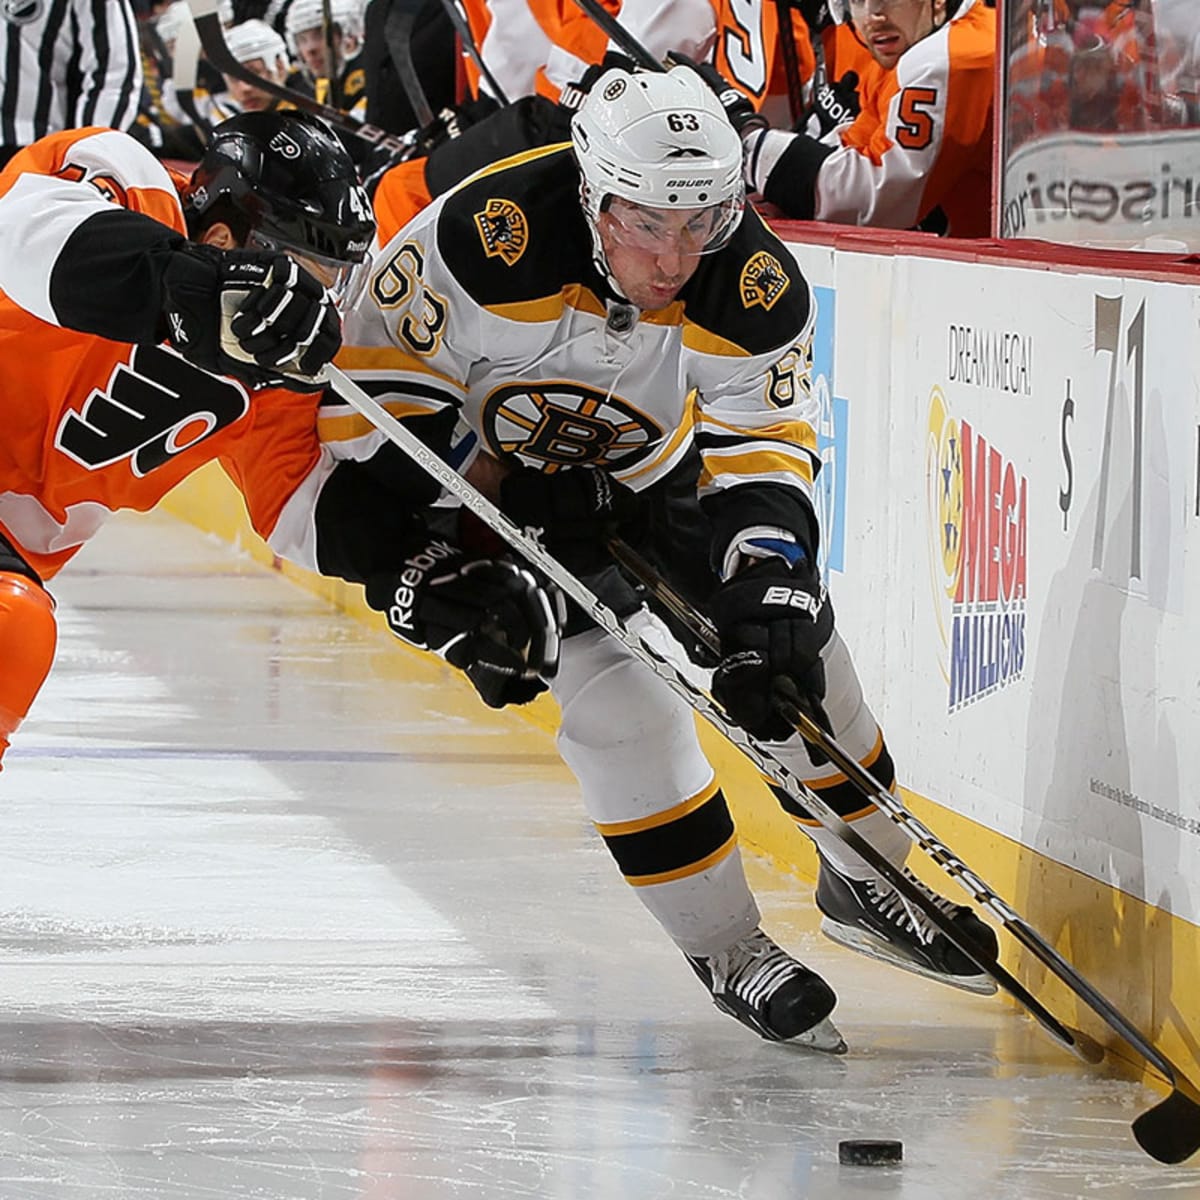 Boston Bruins' Brad Marchand draws criticism from his coach for